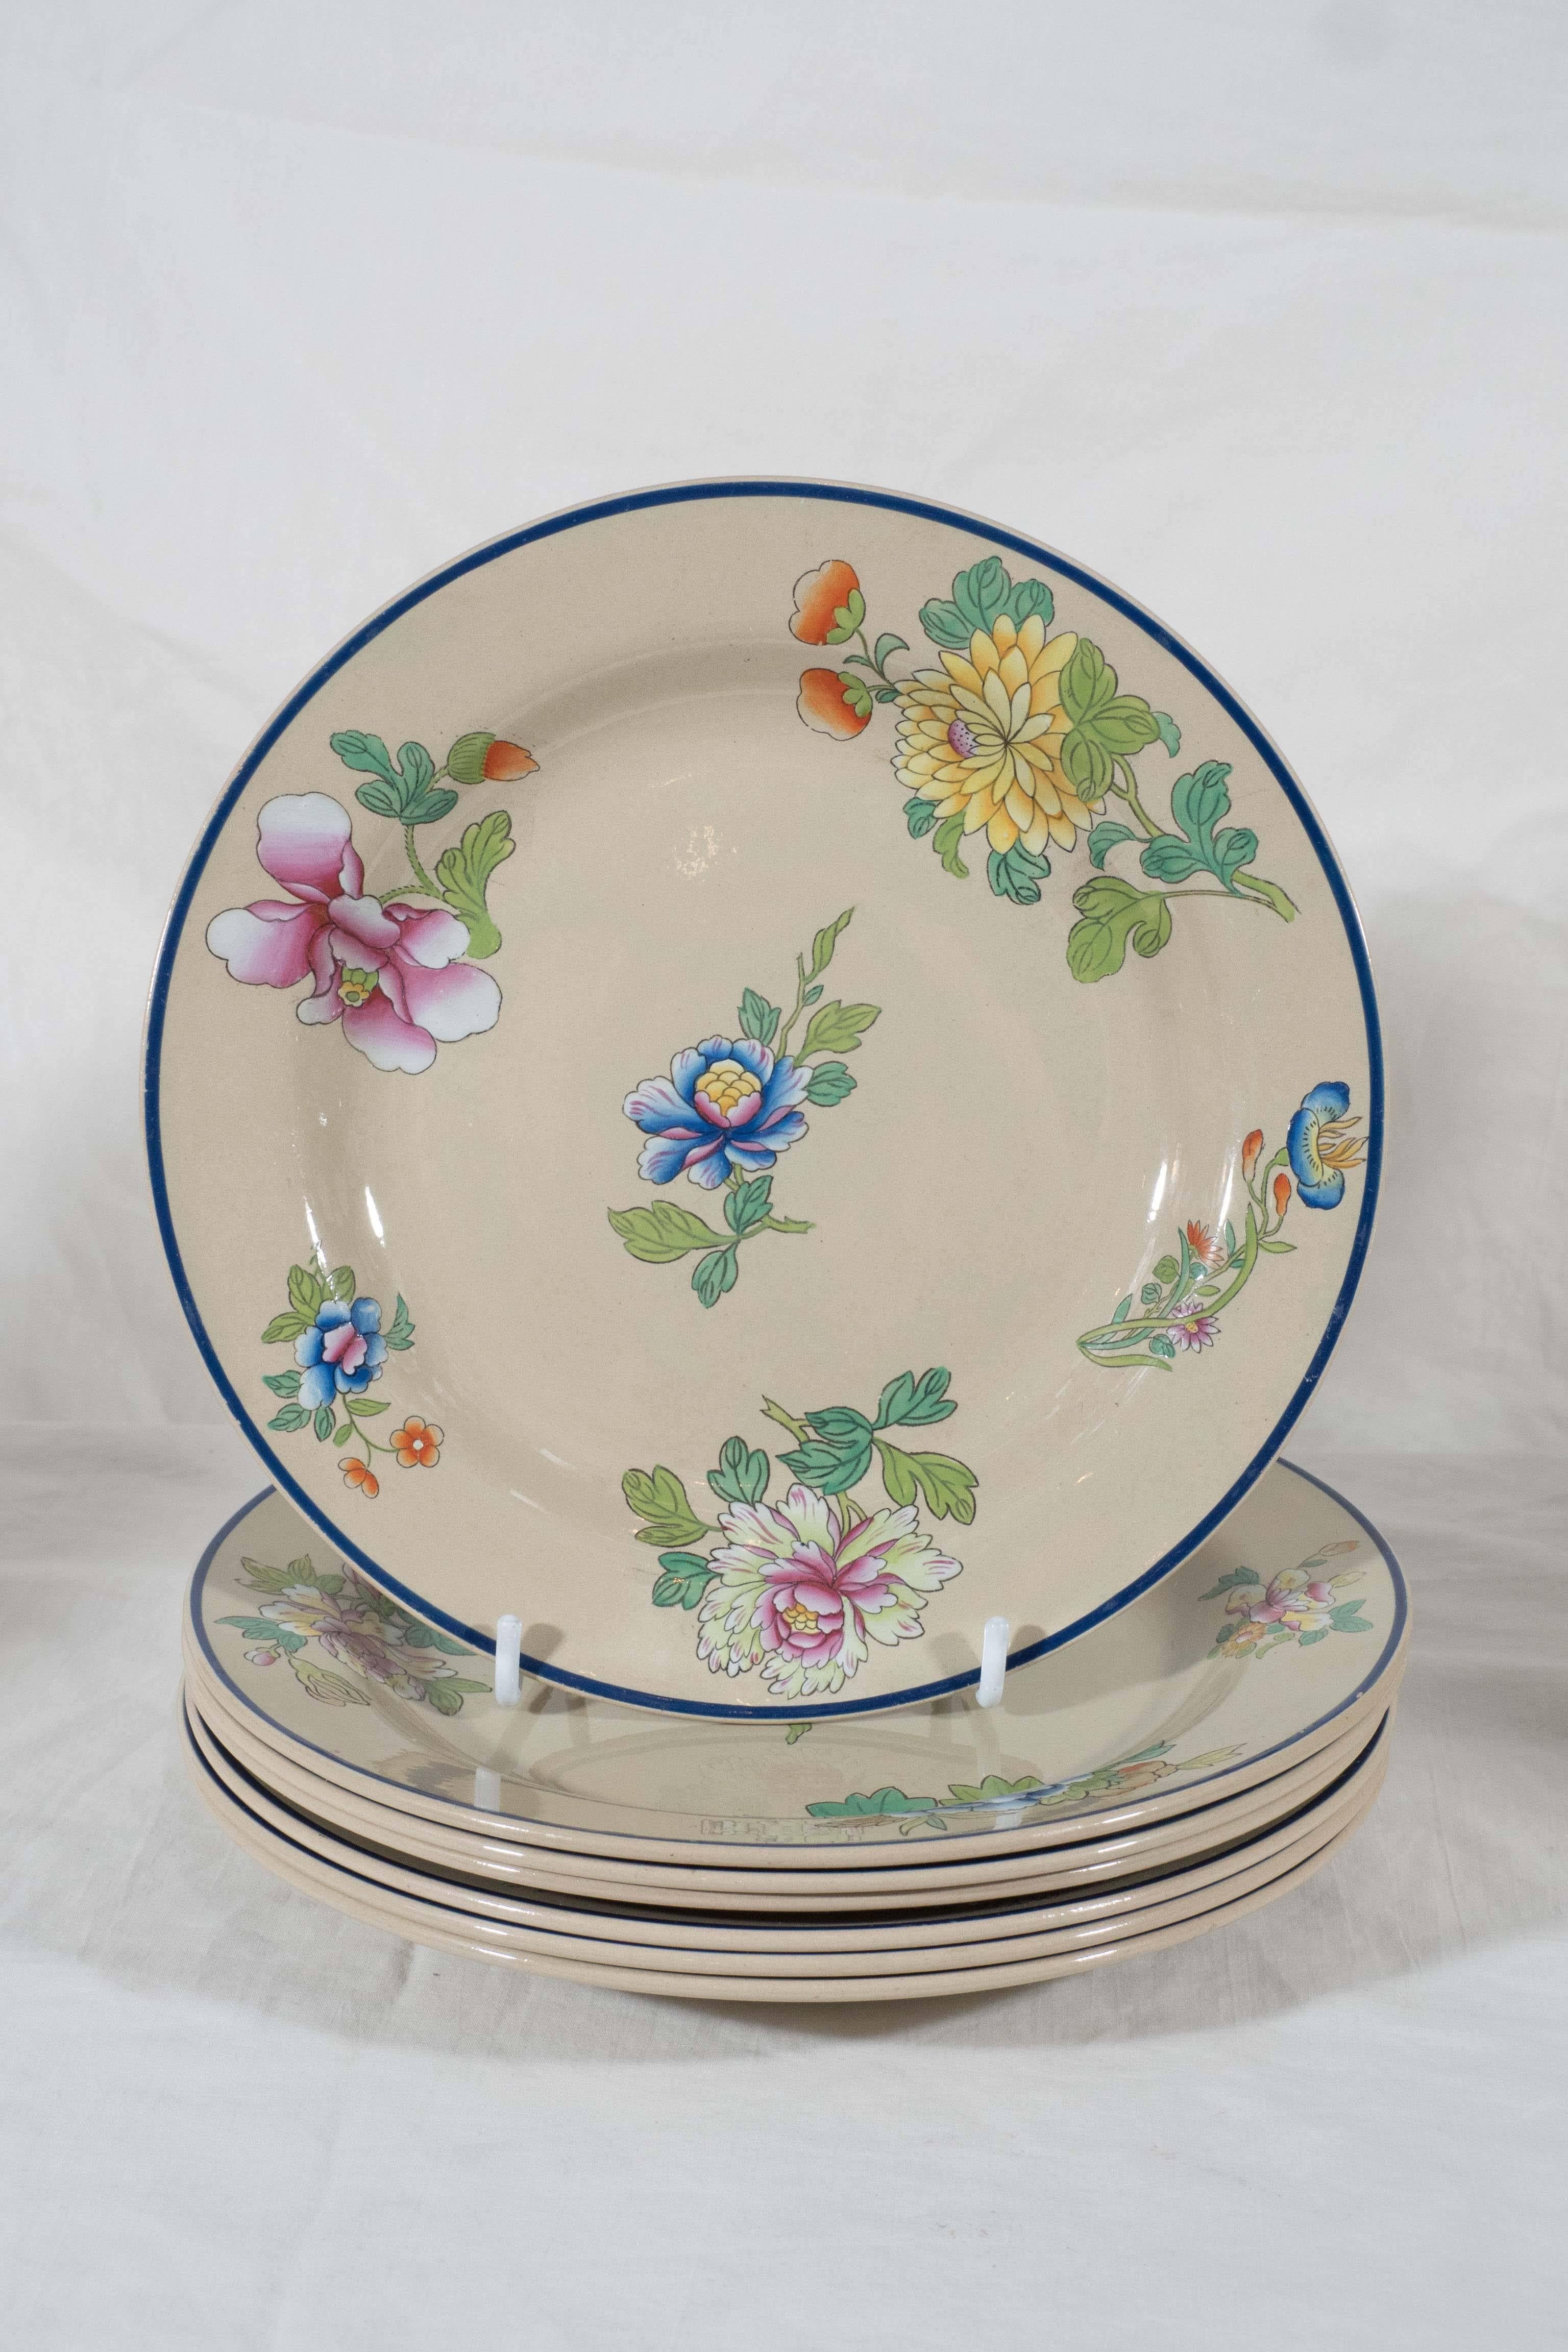 A Wedgwood Drabware part dessert service painted with flowers in soft pastel colors of pink, yellow and blue. The outer edge enhanced by a cobalt blue line.
The service consists of 10 dessert dishes, one rectangular serving dish and a pair of oval